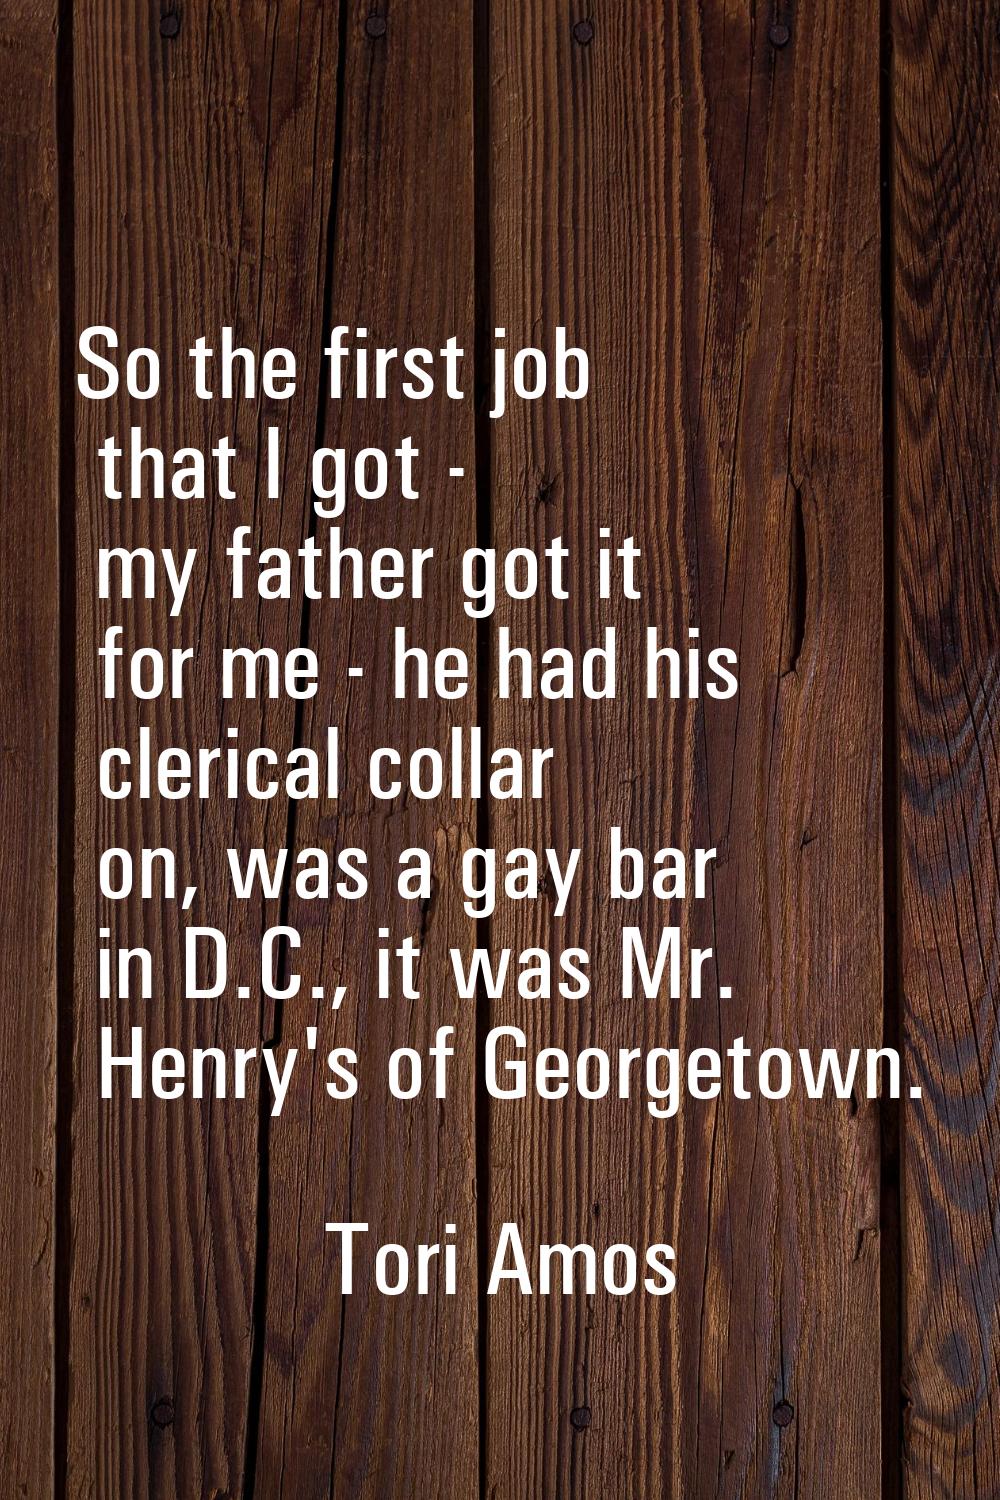 So the first job that I got - my father got it for me - he had his clerical collar on, was a gay ba